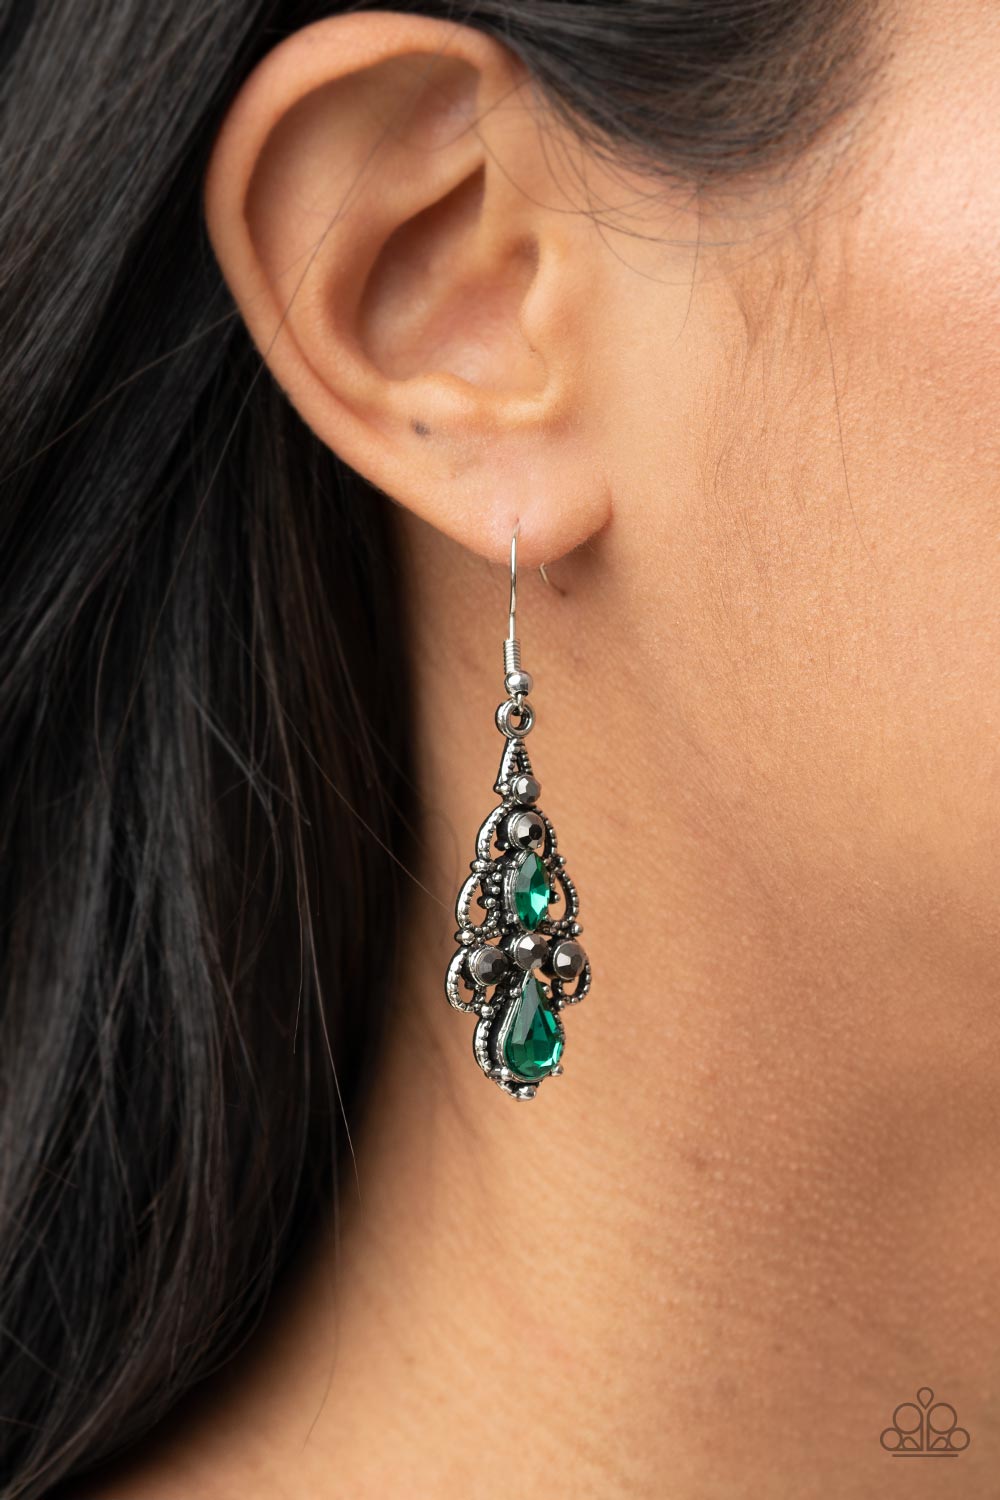 Urban Radiance Green Earring - Paparazzi Accessories  Embellished in mismatched green and hematite rhinestones, studded silver filigree swirls into an airy chandelier, creating a regal lure. Earring attaches to a standard fishhook fitting.  All Paparazzi Accessories are lead free and nickel free!  Sold as one pair of earrings.